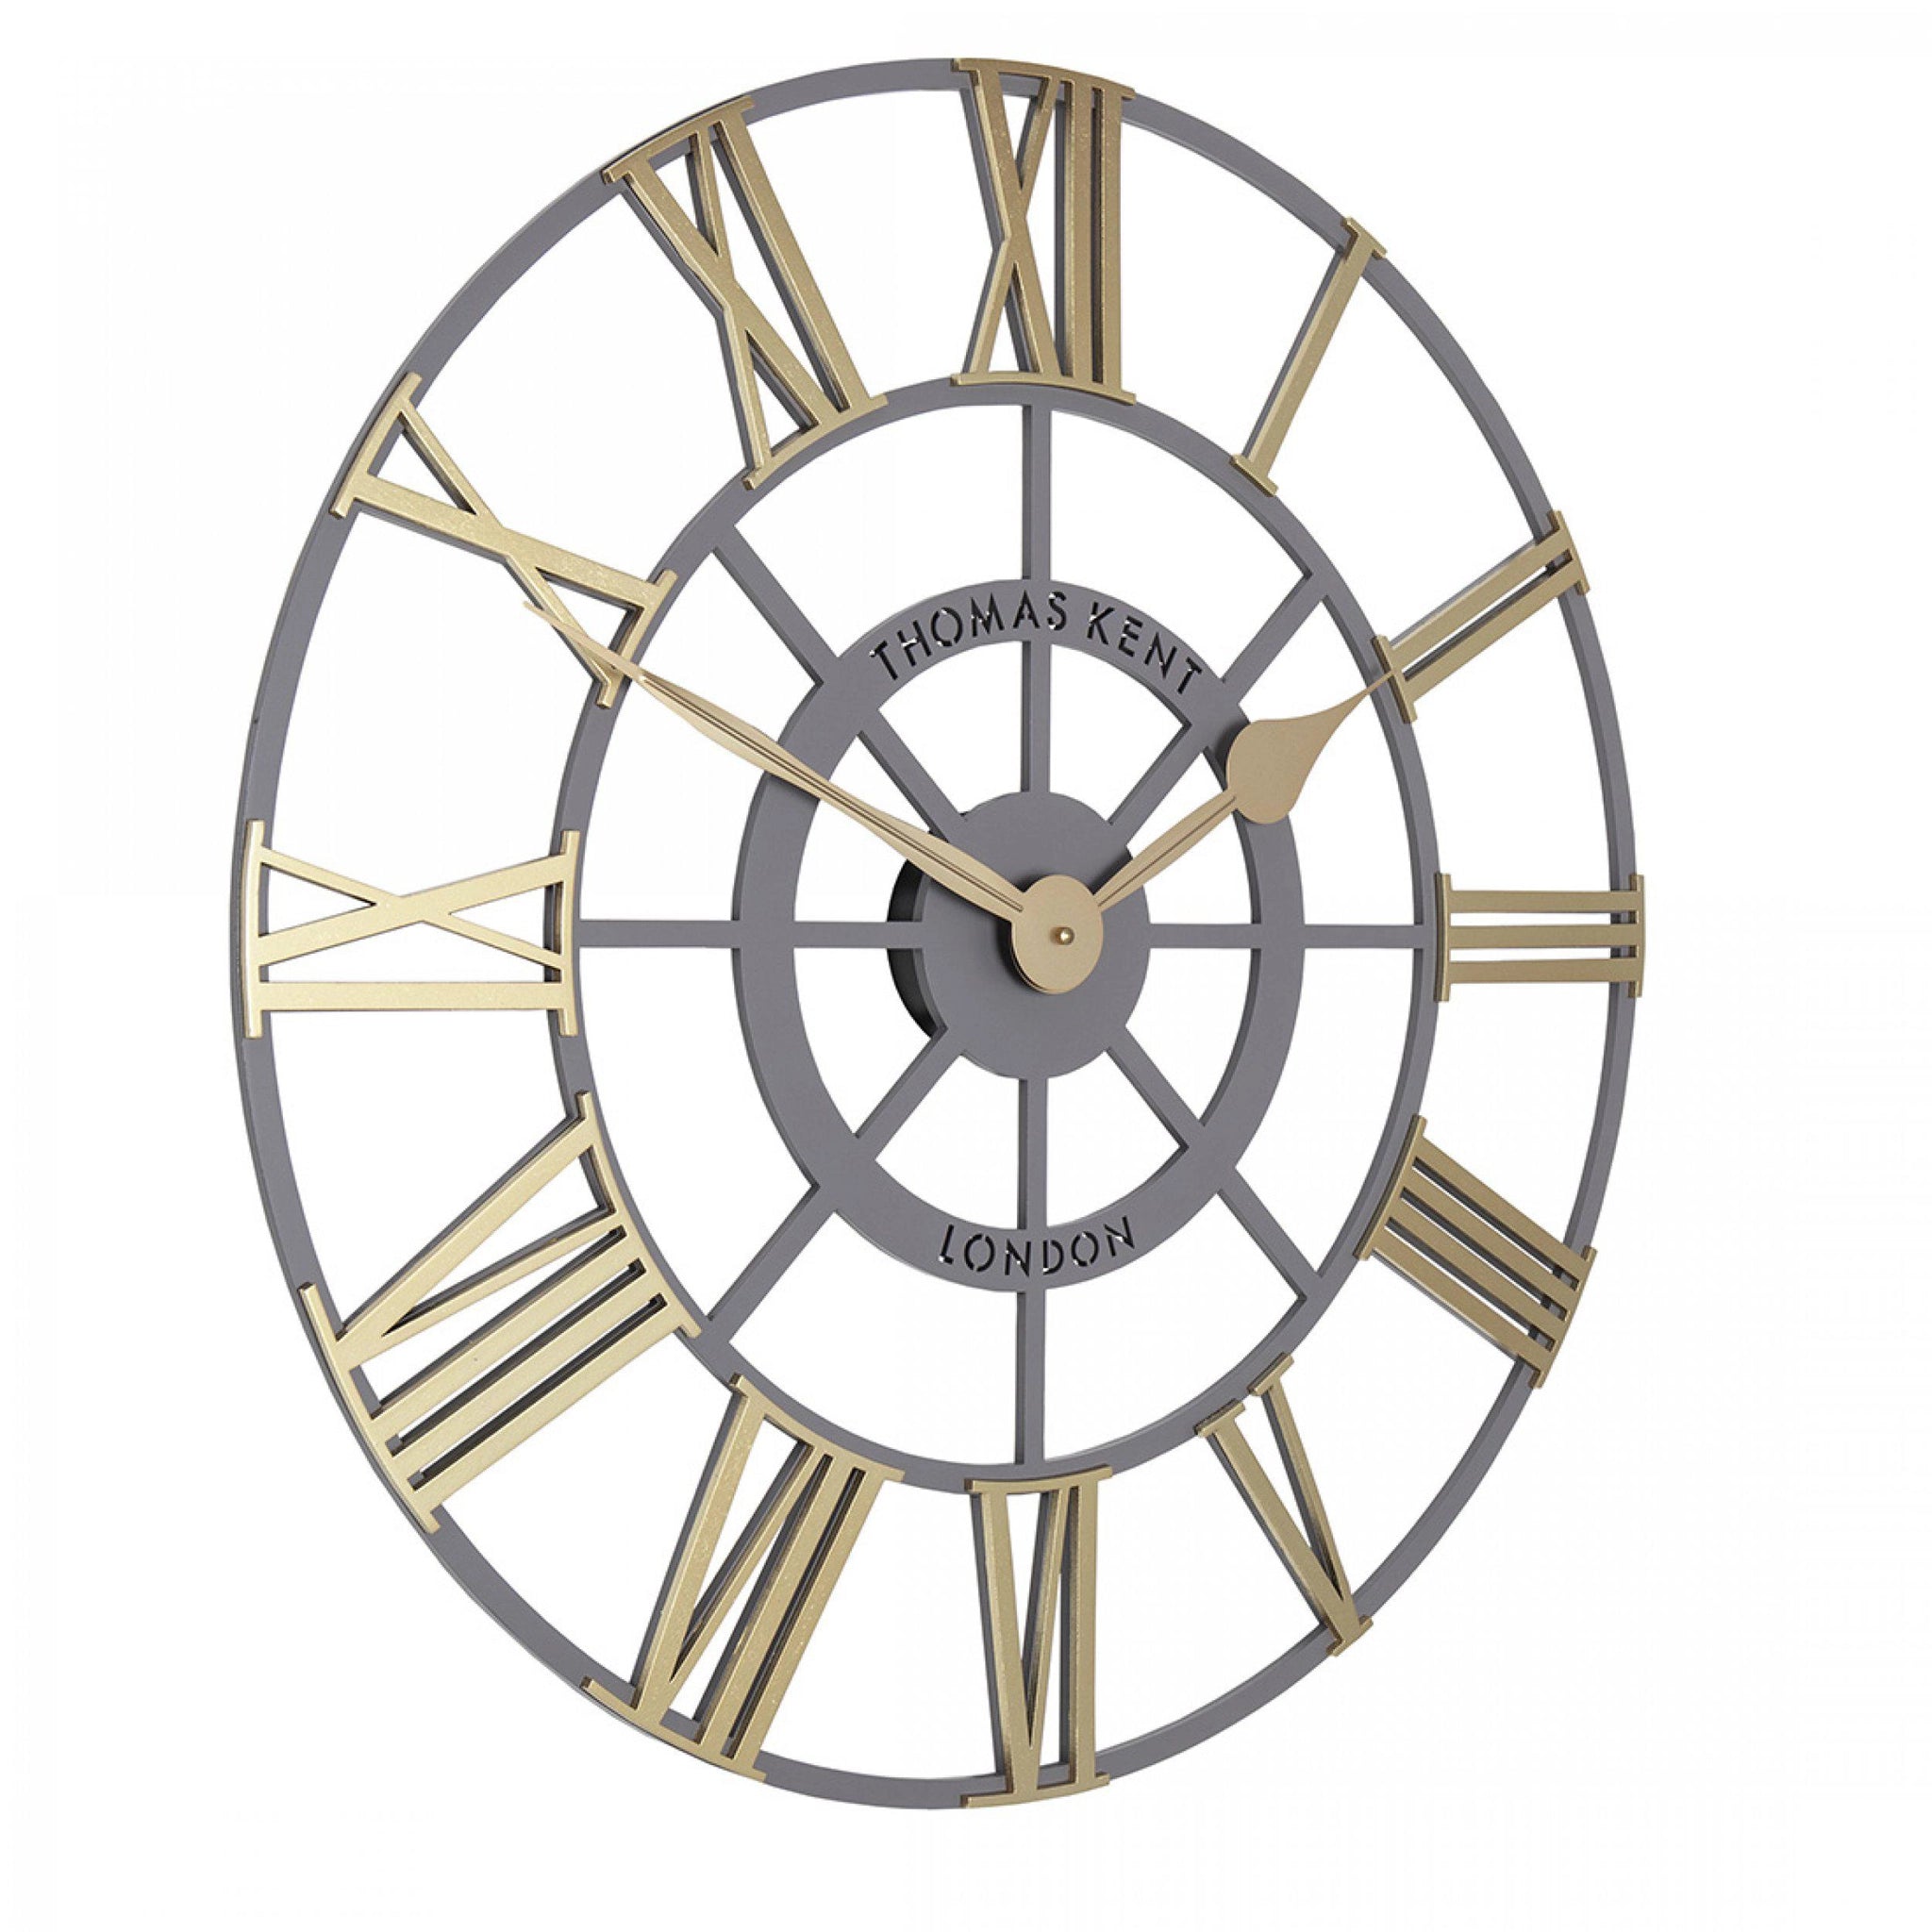 Side view of round skeleton wall clock with grey frame and contrasting gold hands and roman numerals.